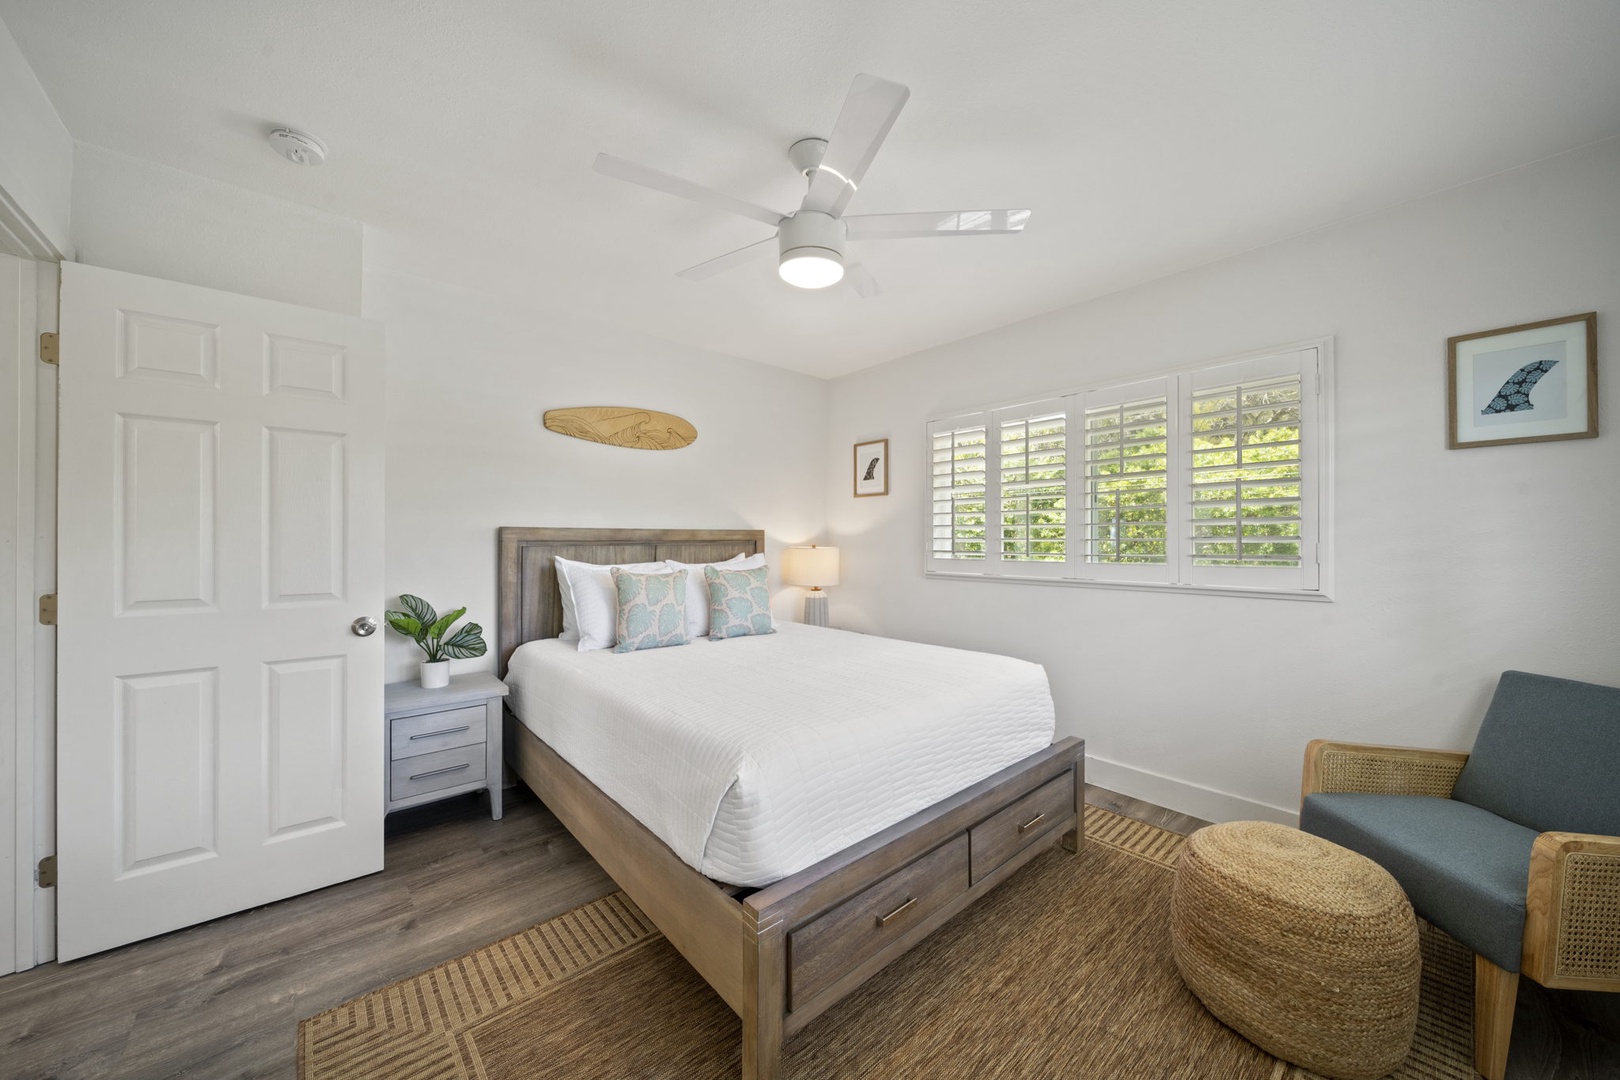 Haleiwa Vacation Rentals, Hale Nalu - Guest Bedroom 5 has a queen size bed, ceiling fan, and split A/C